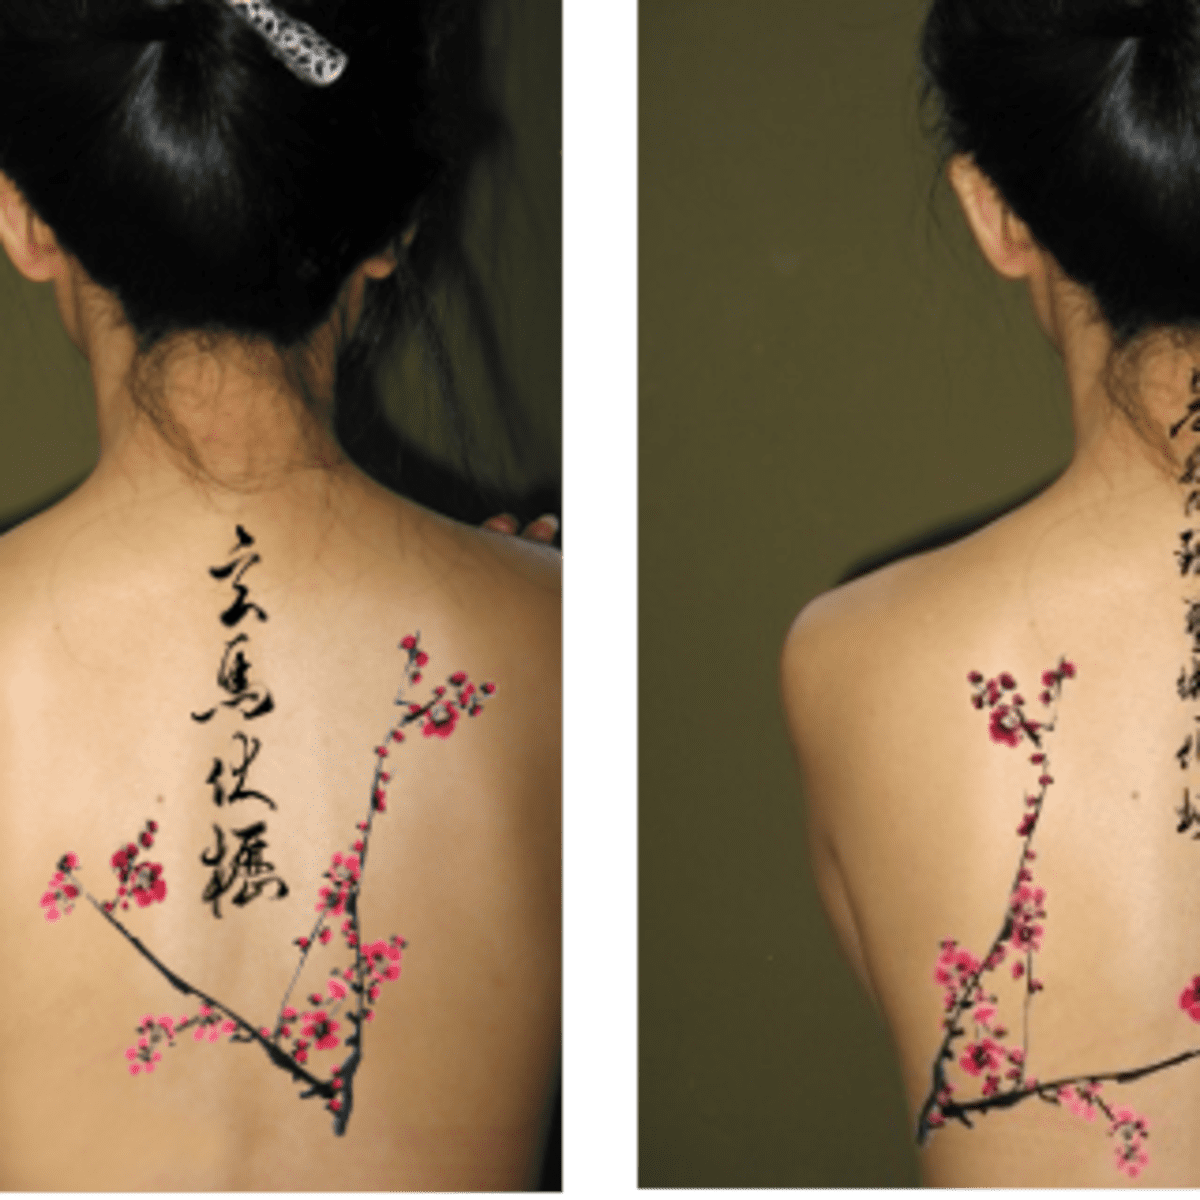 Man Gets the Most Hilariously Ironic Chinese Tattoo Ever